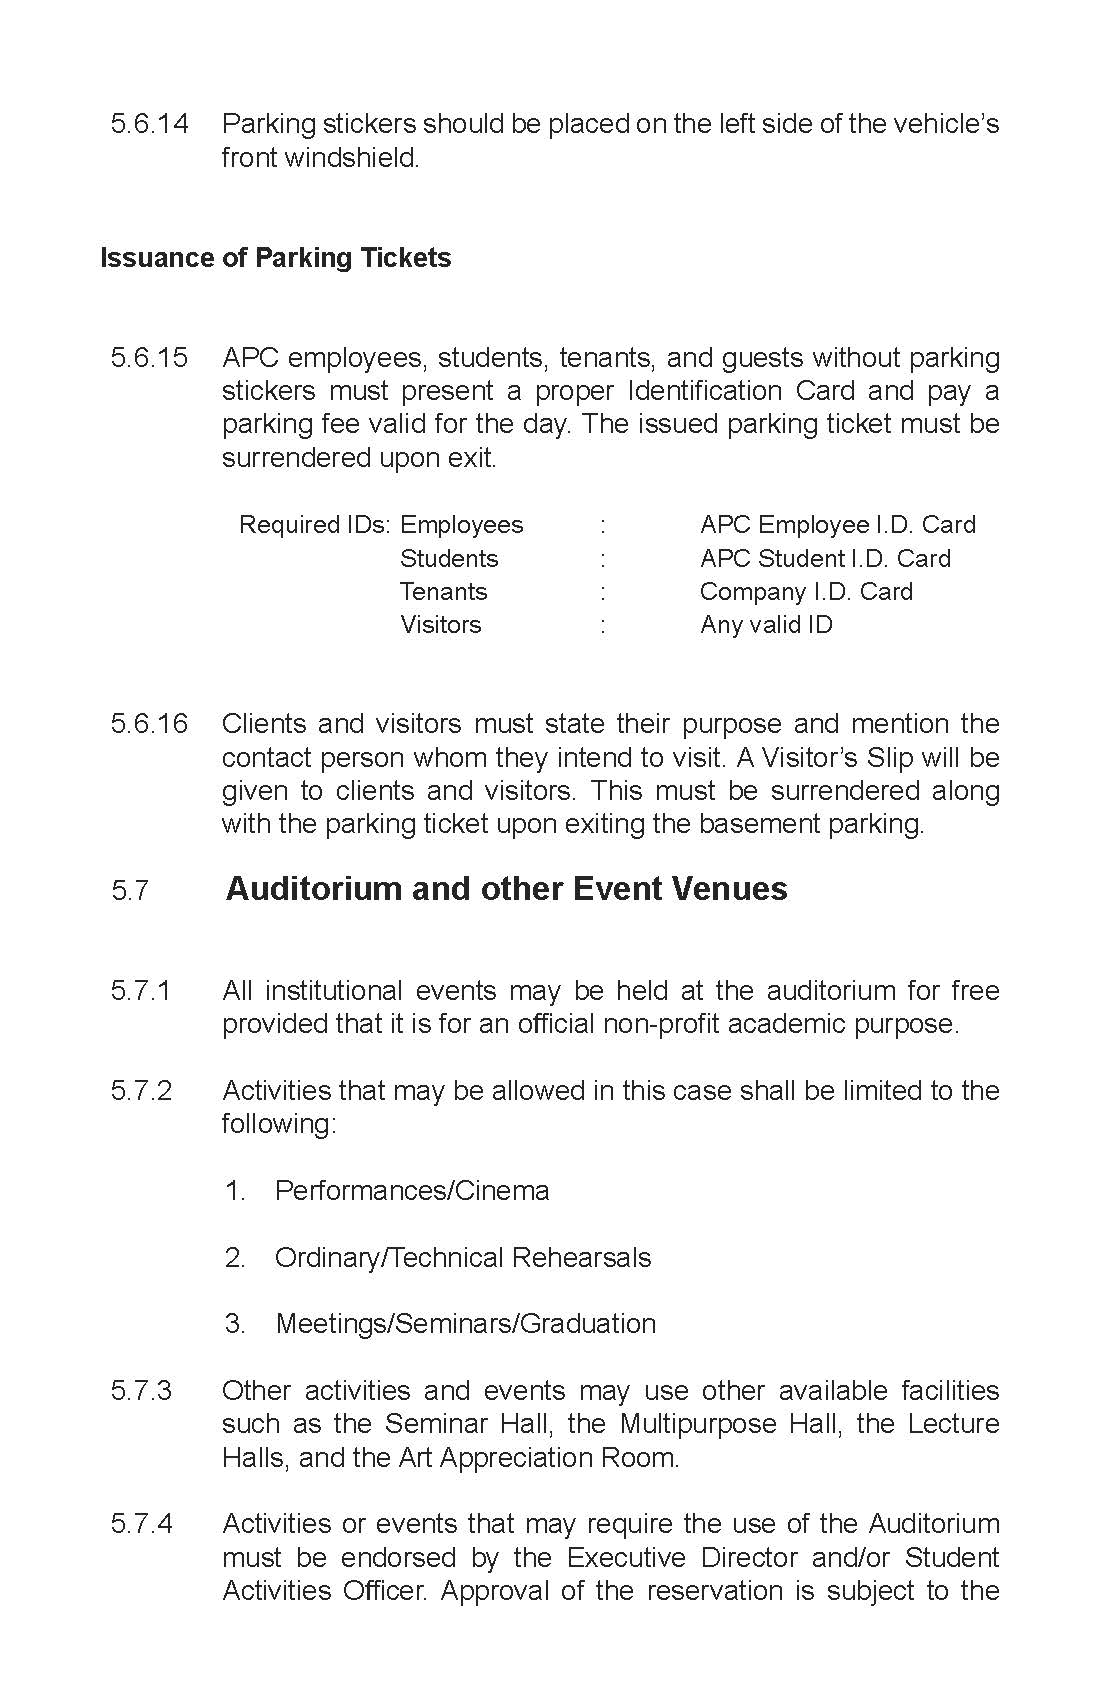 APC Policies, Rules, and Regulations Playbook_Page_22